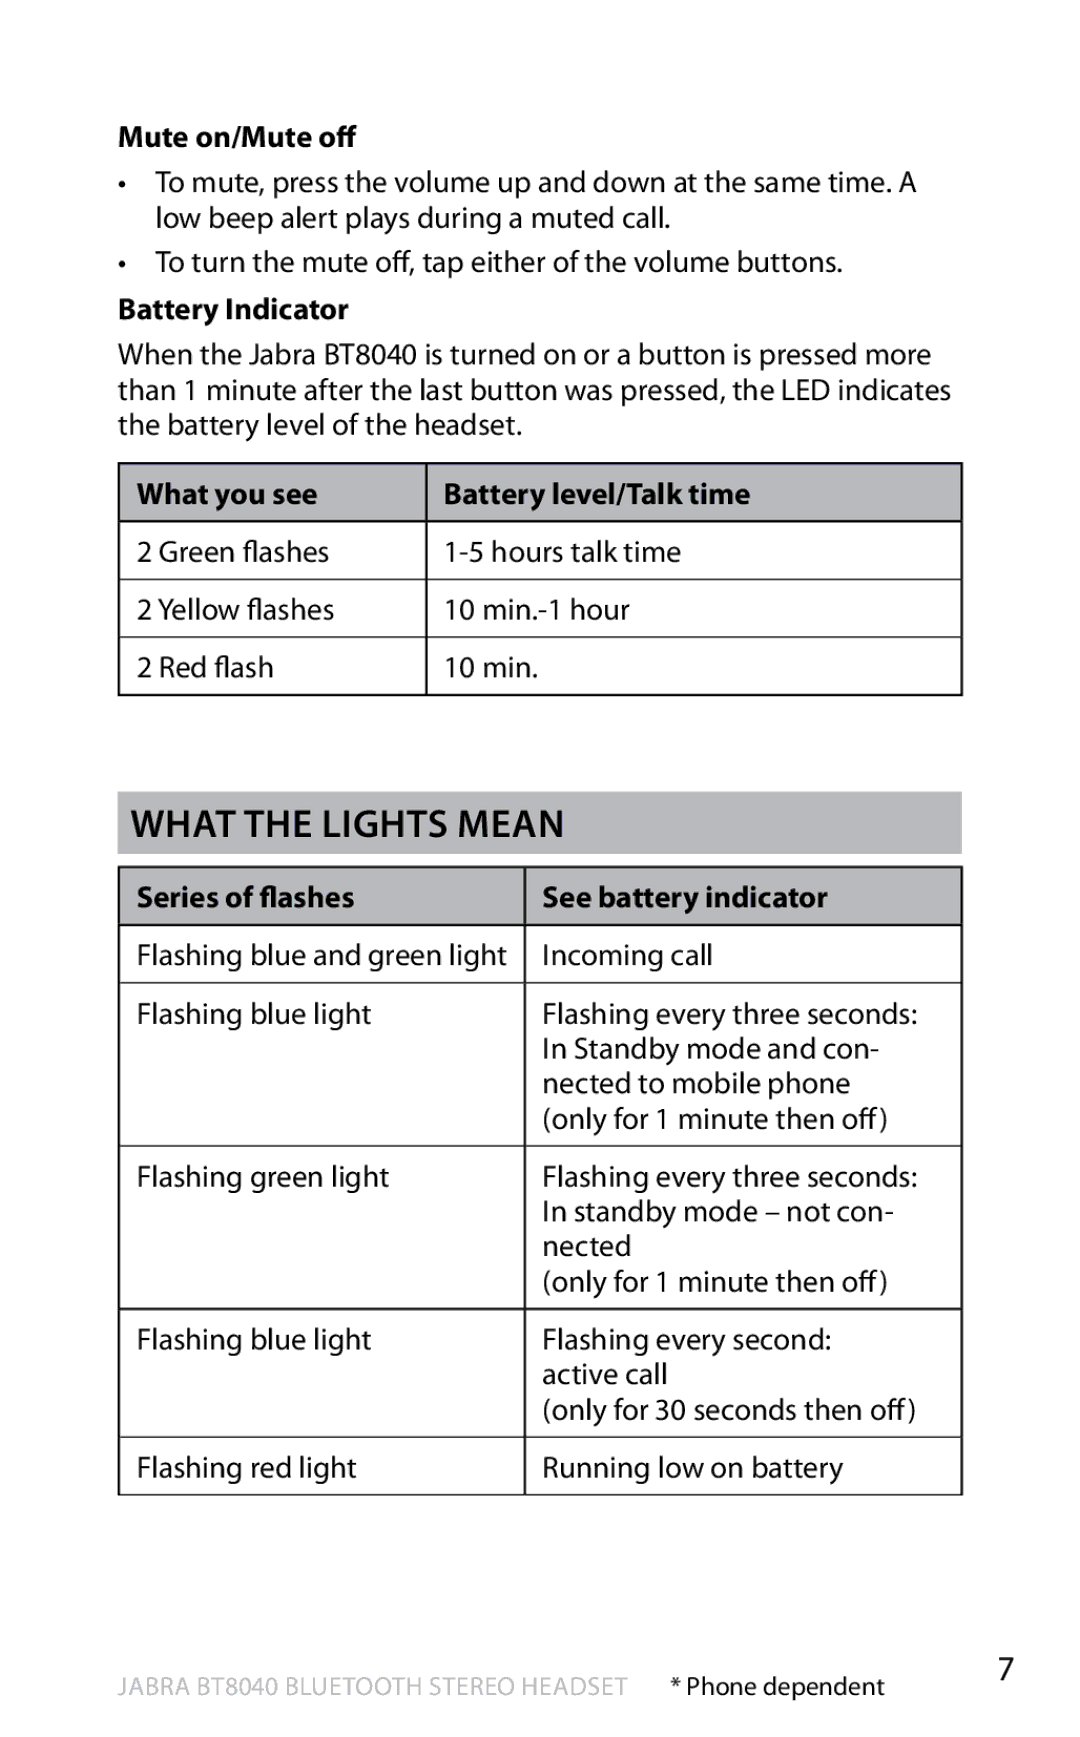 Jabra BT8040 user manual What the lights mean, Mute on/Mute off, Battery Indicator, What you see Battery level/Talk time 